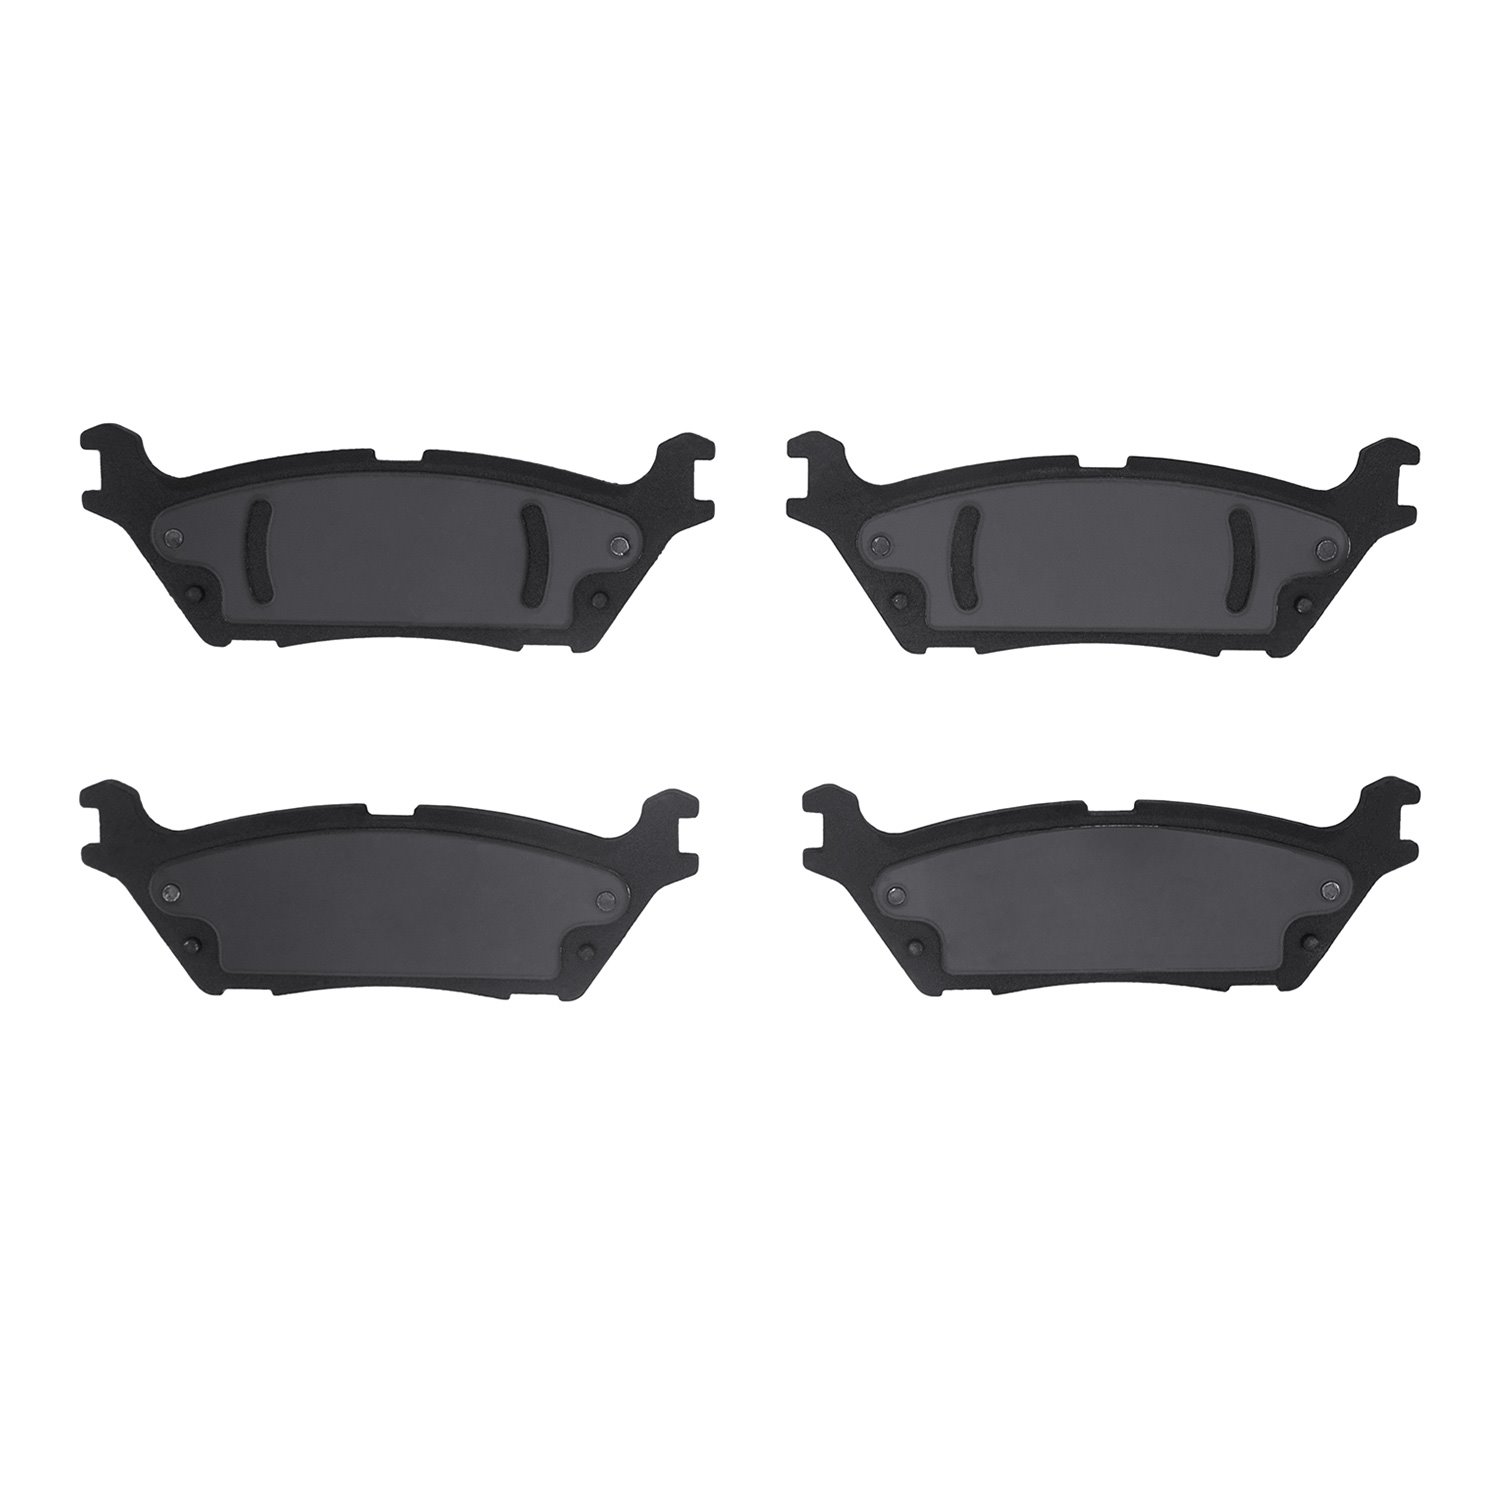 1400-2383-00 Ultimate-Duty Brake Pads Kit, Fits Select Ford/Lincoln/Mercury/Mazda, Position: Rear